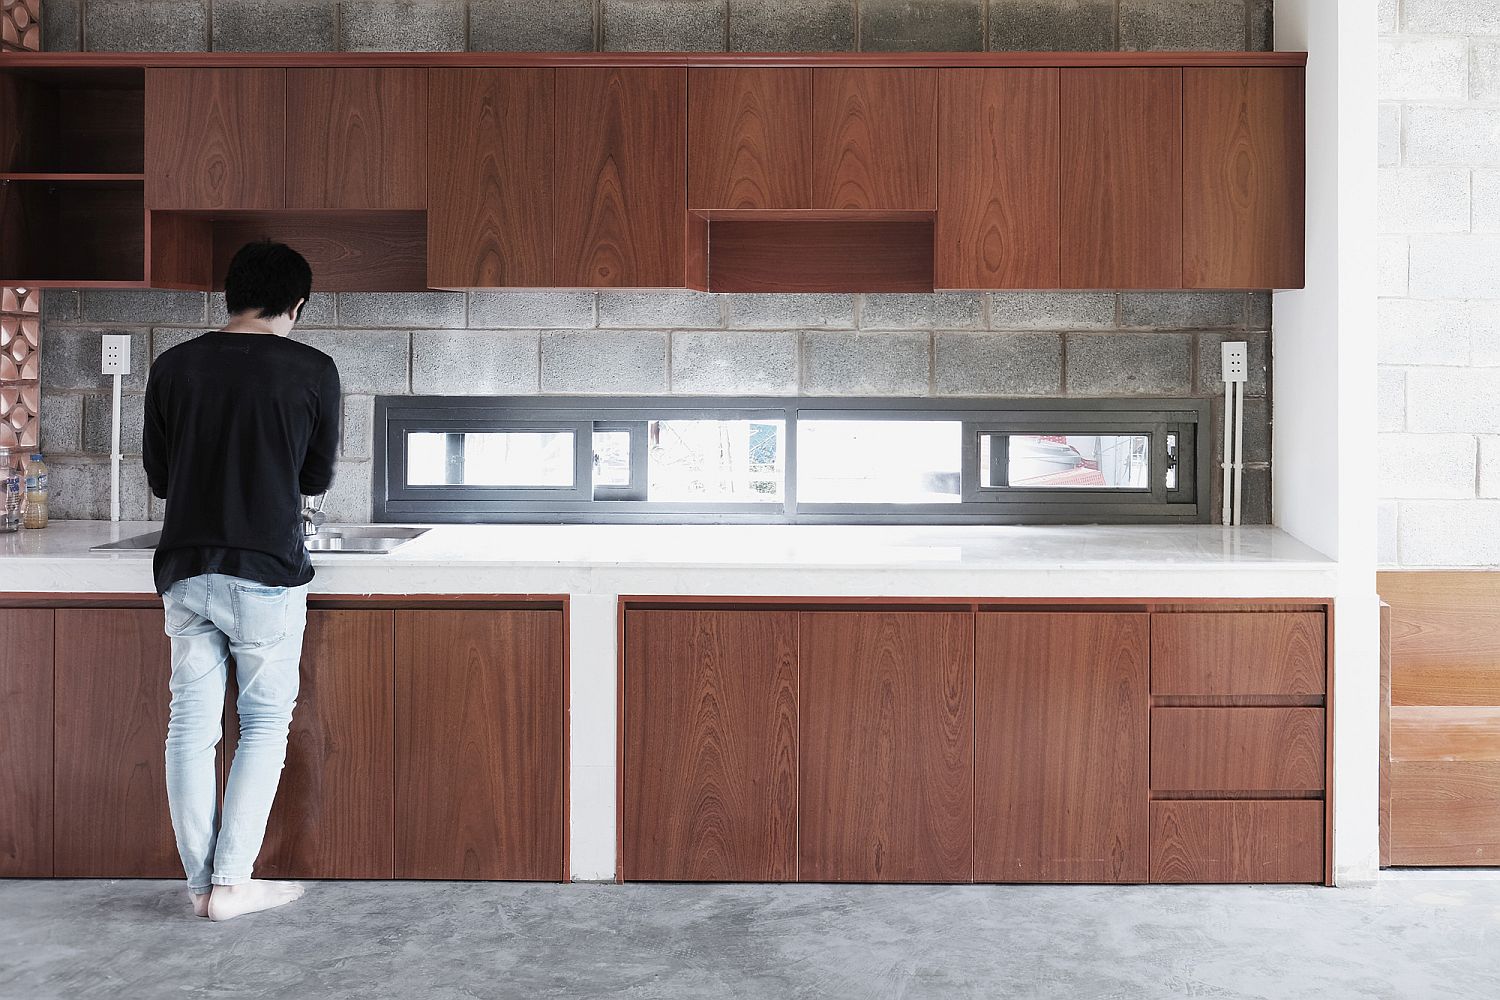 Small-and-narrow-window-above-the-kitchen-station-brings-in-natural-light-1